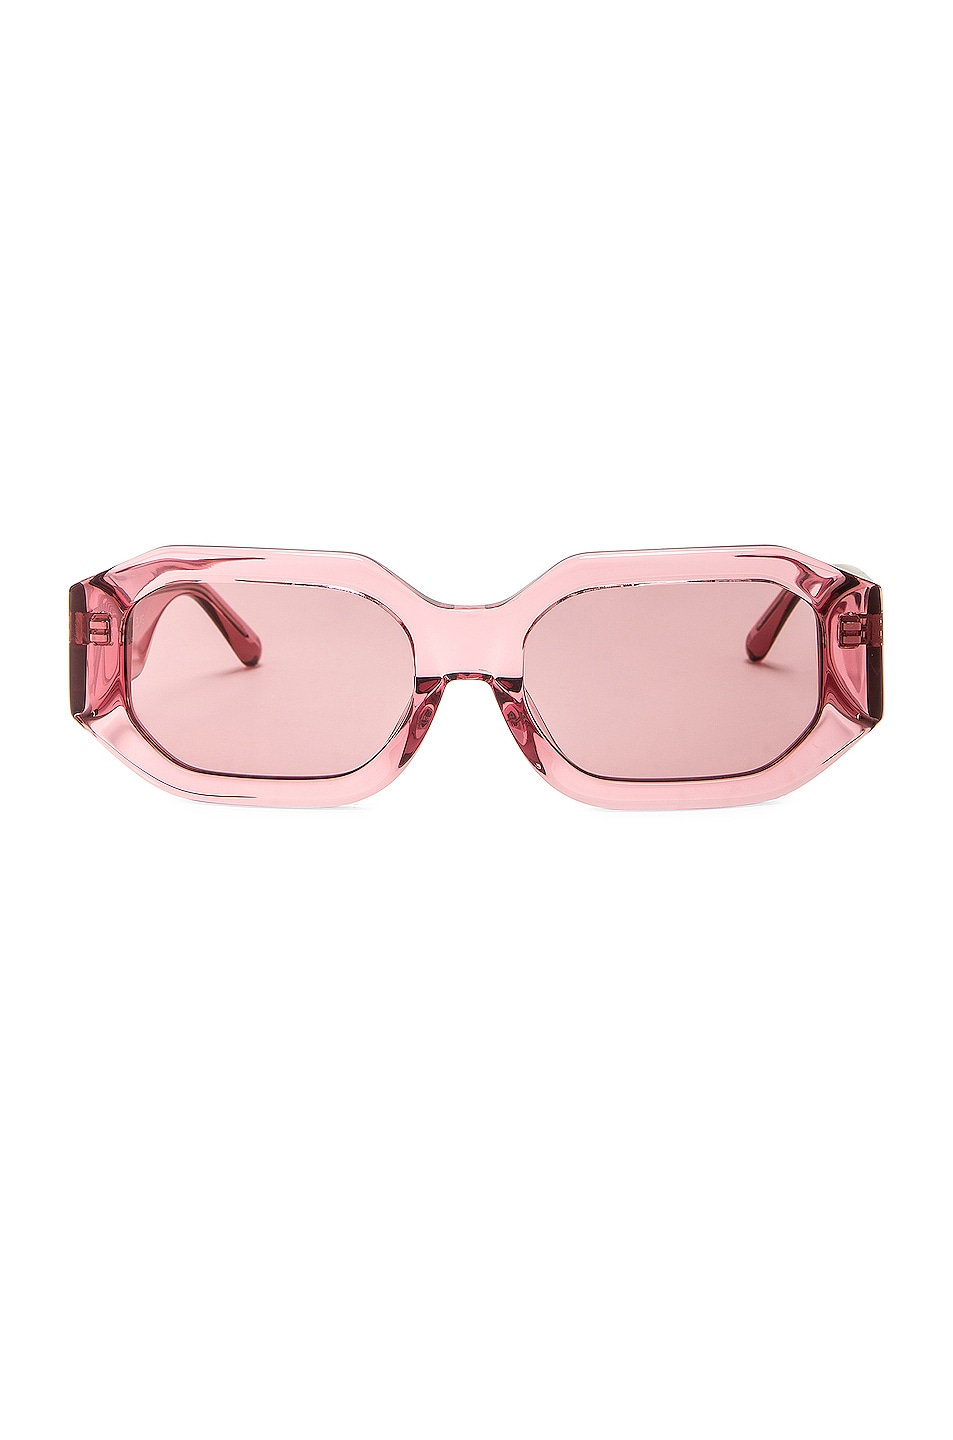 Blake Sunglasses In Pink in Pink